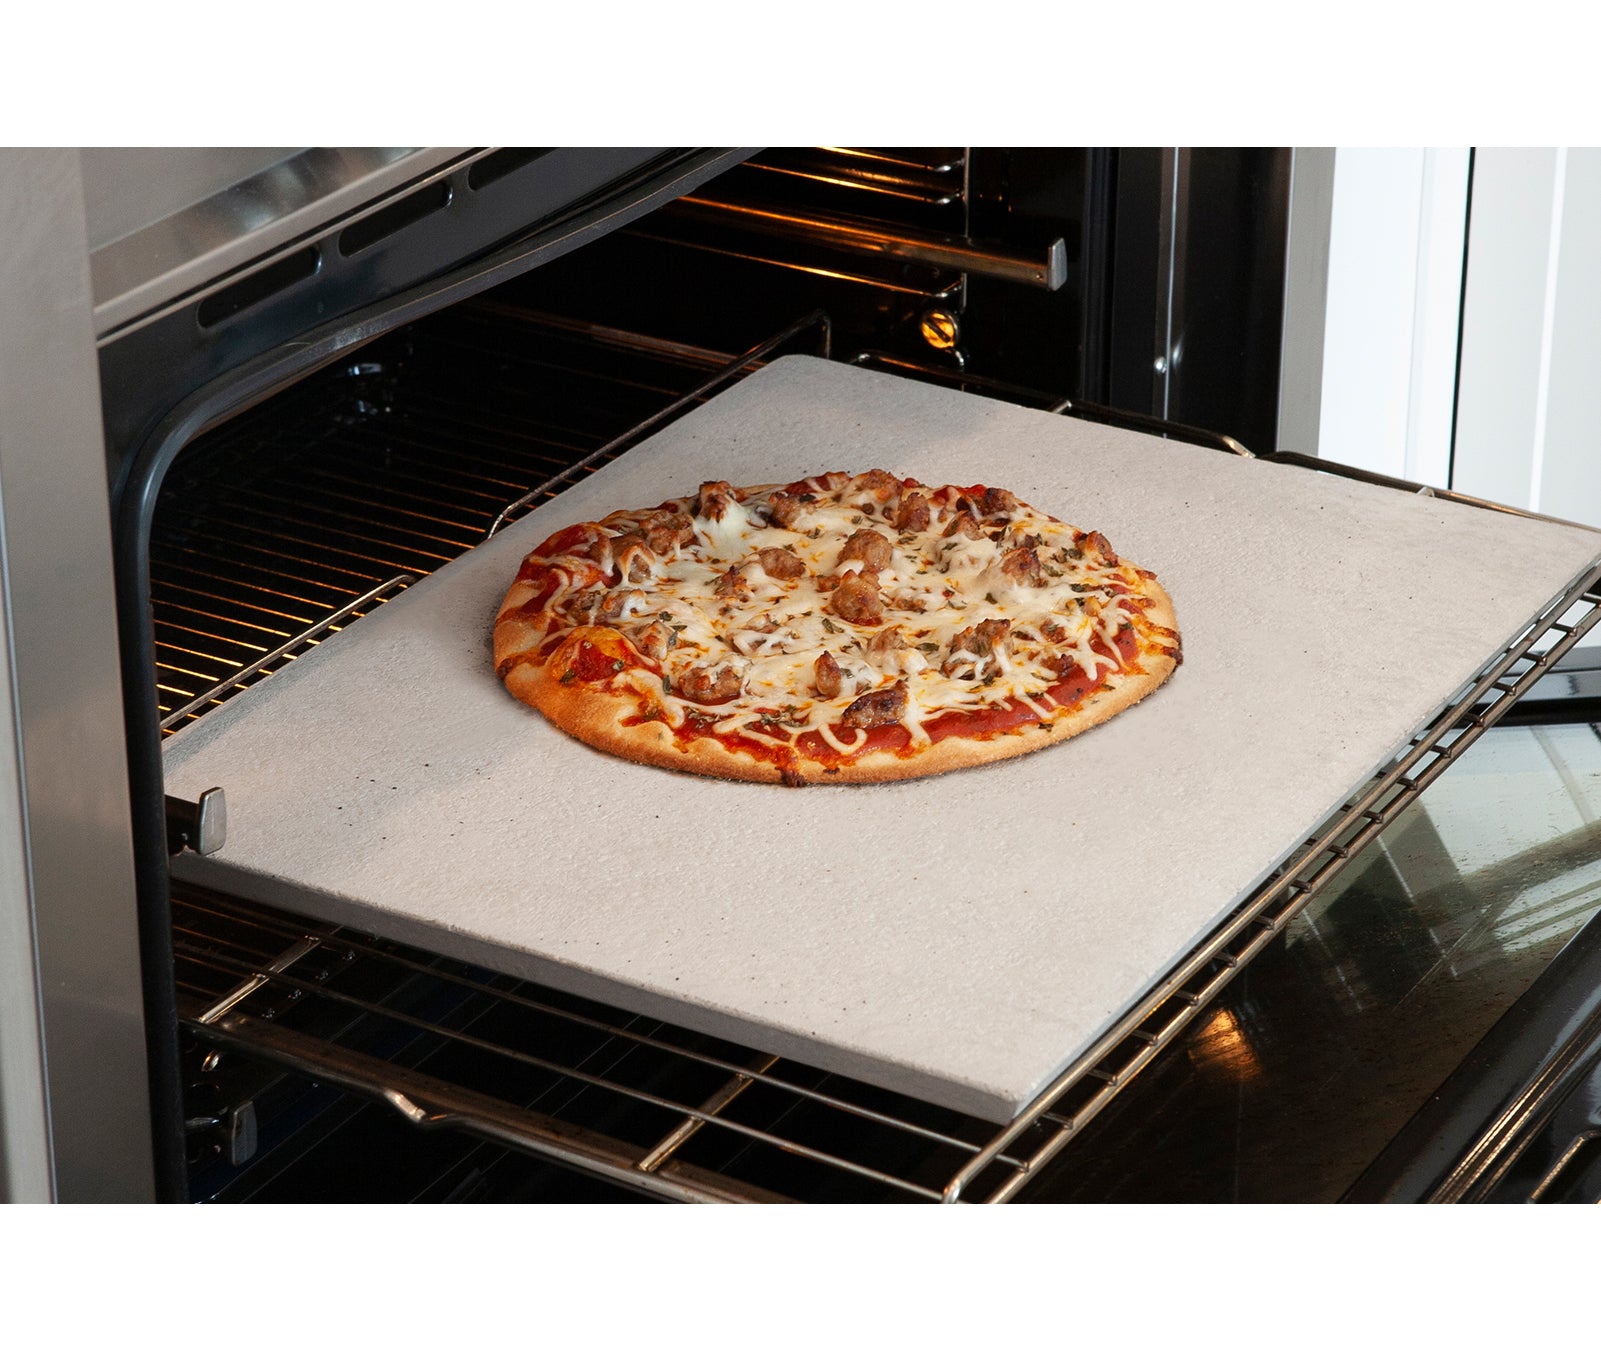 Home Oven Baking Stone 20" x 15"